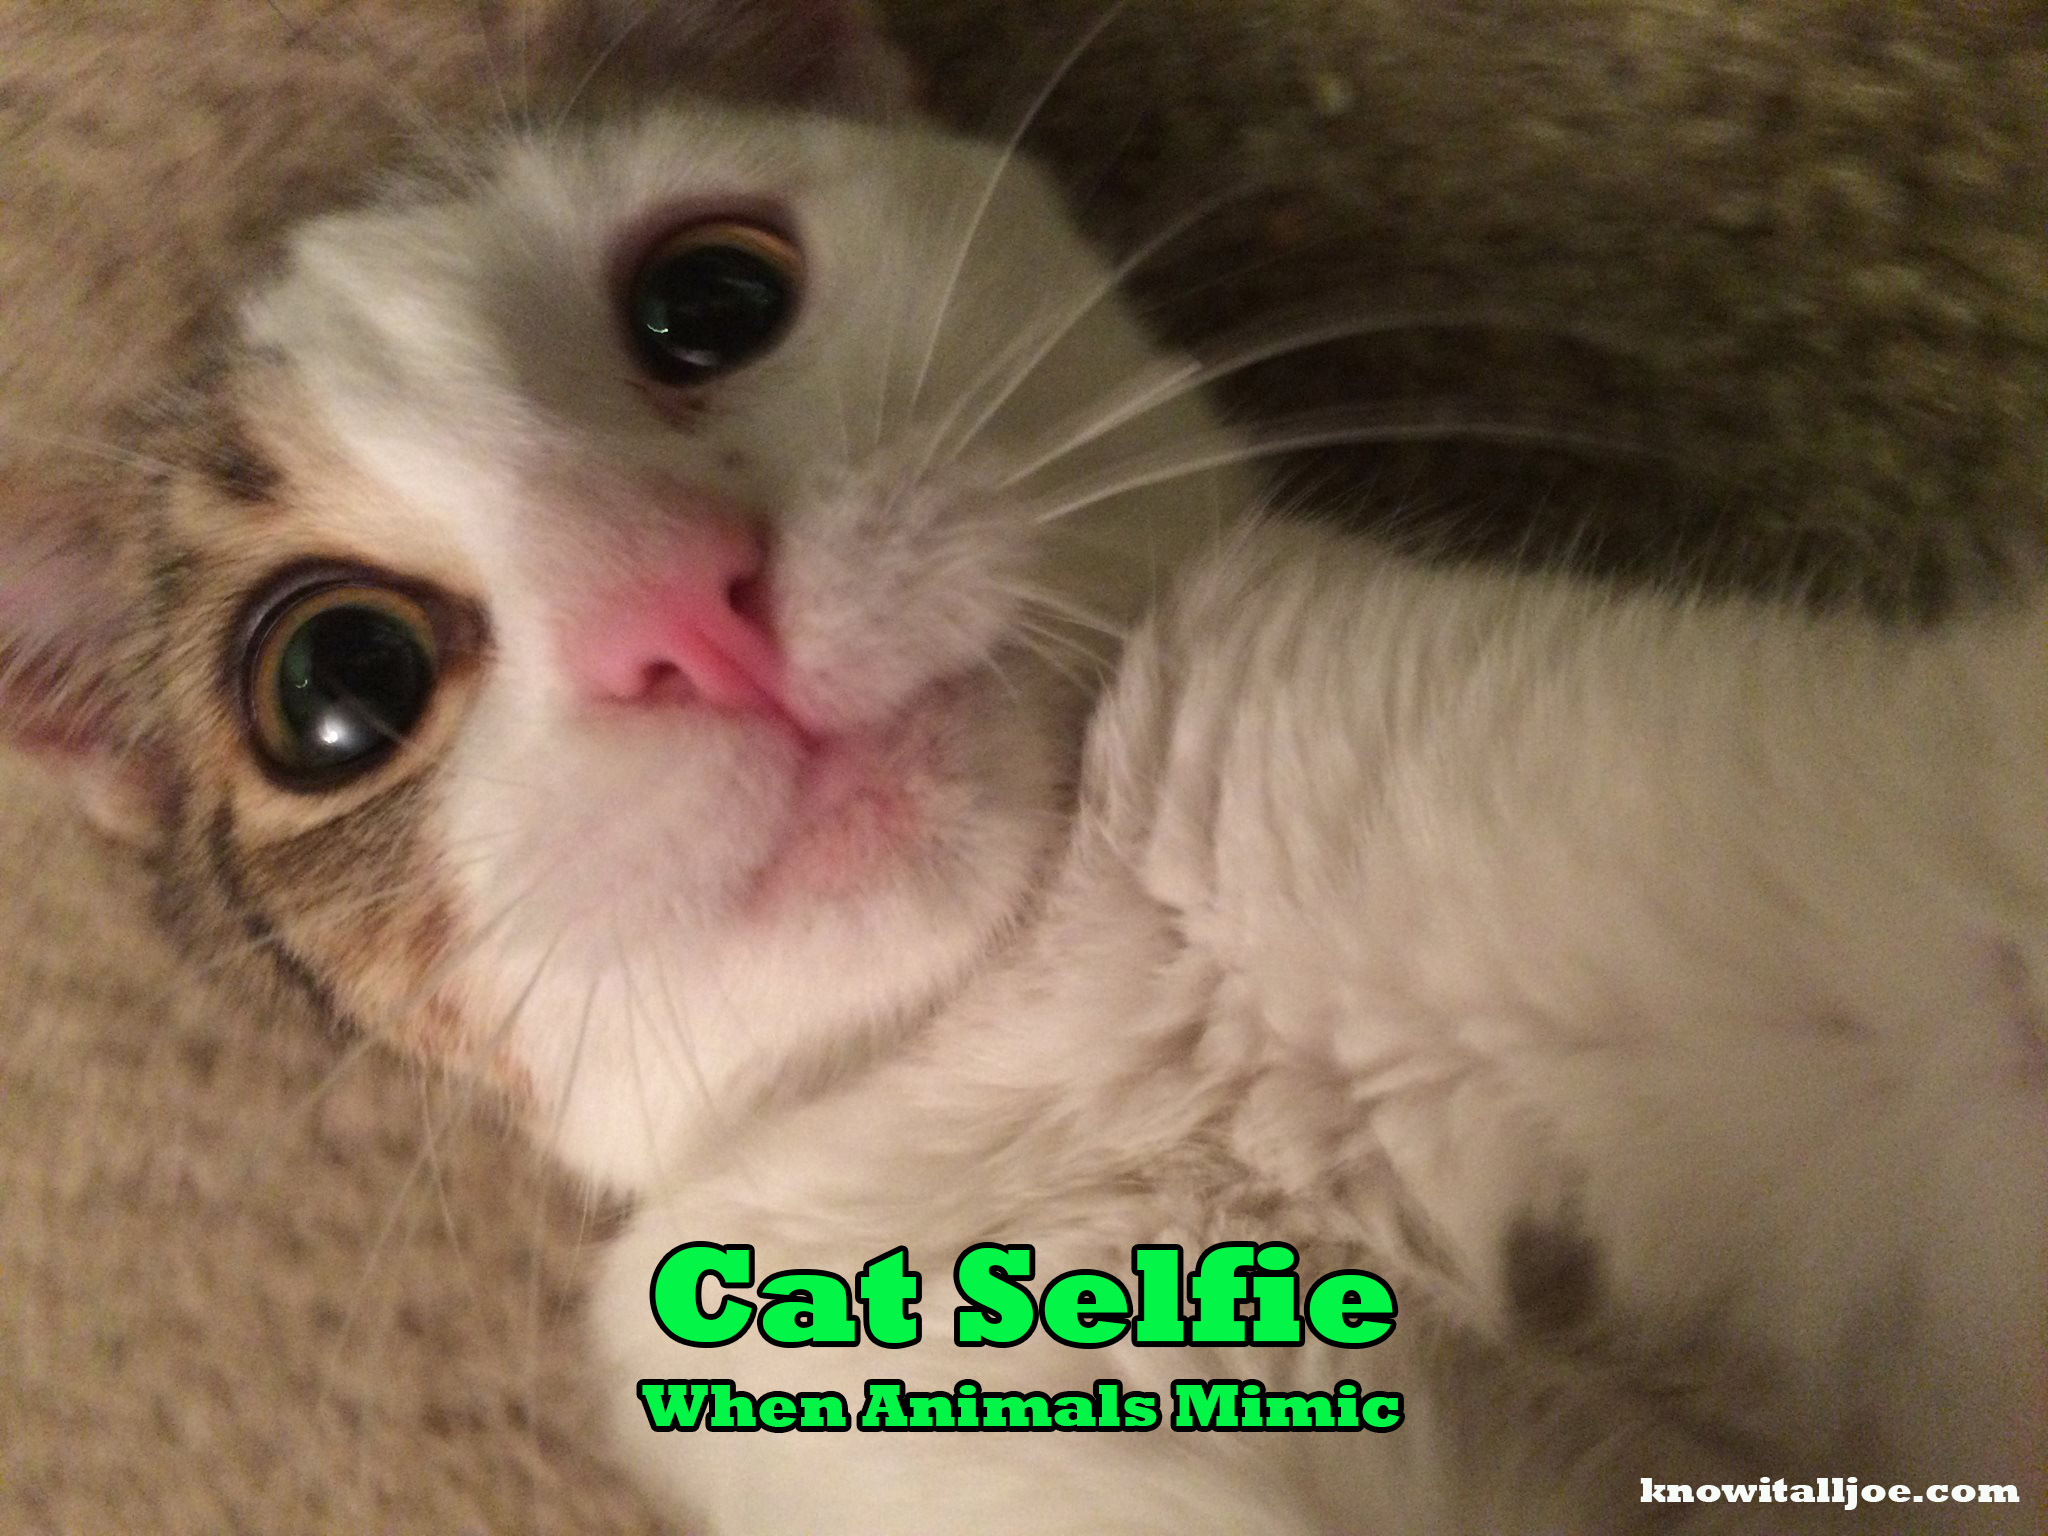 Know It All Joe's Meme For The Day - Cat Selfie! | Know It ...